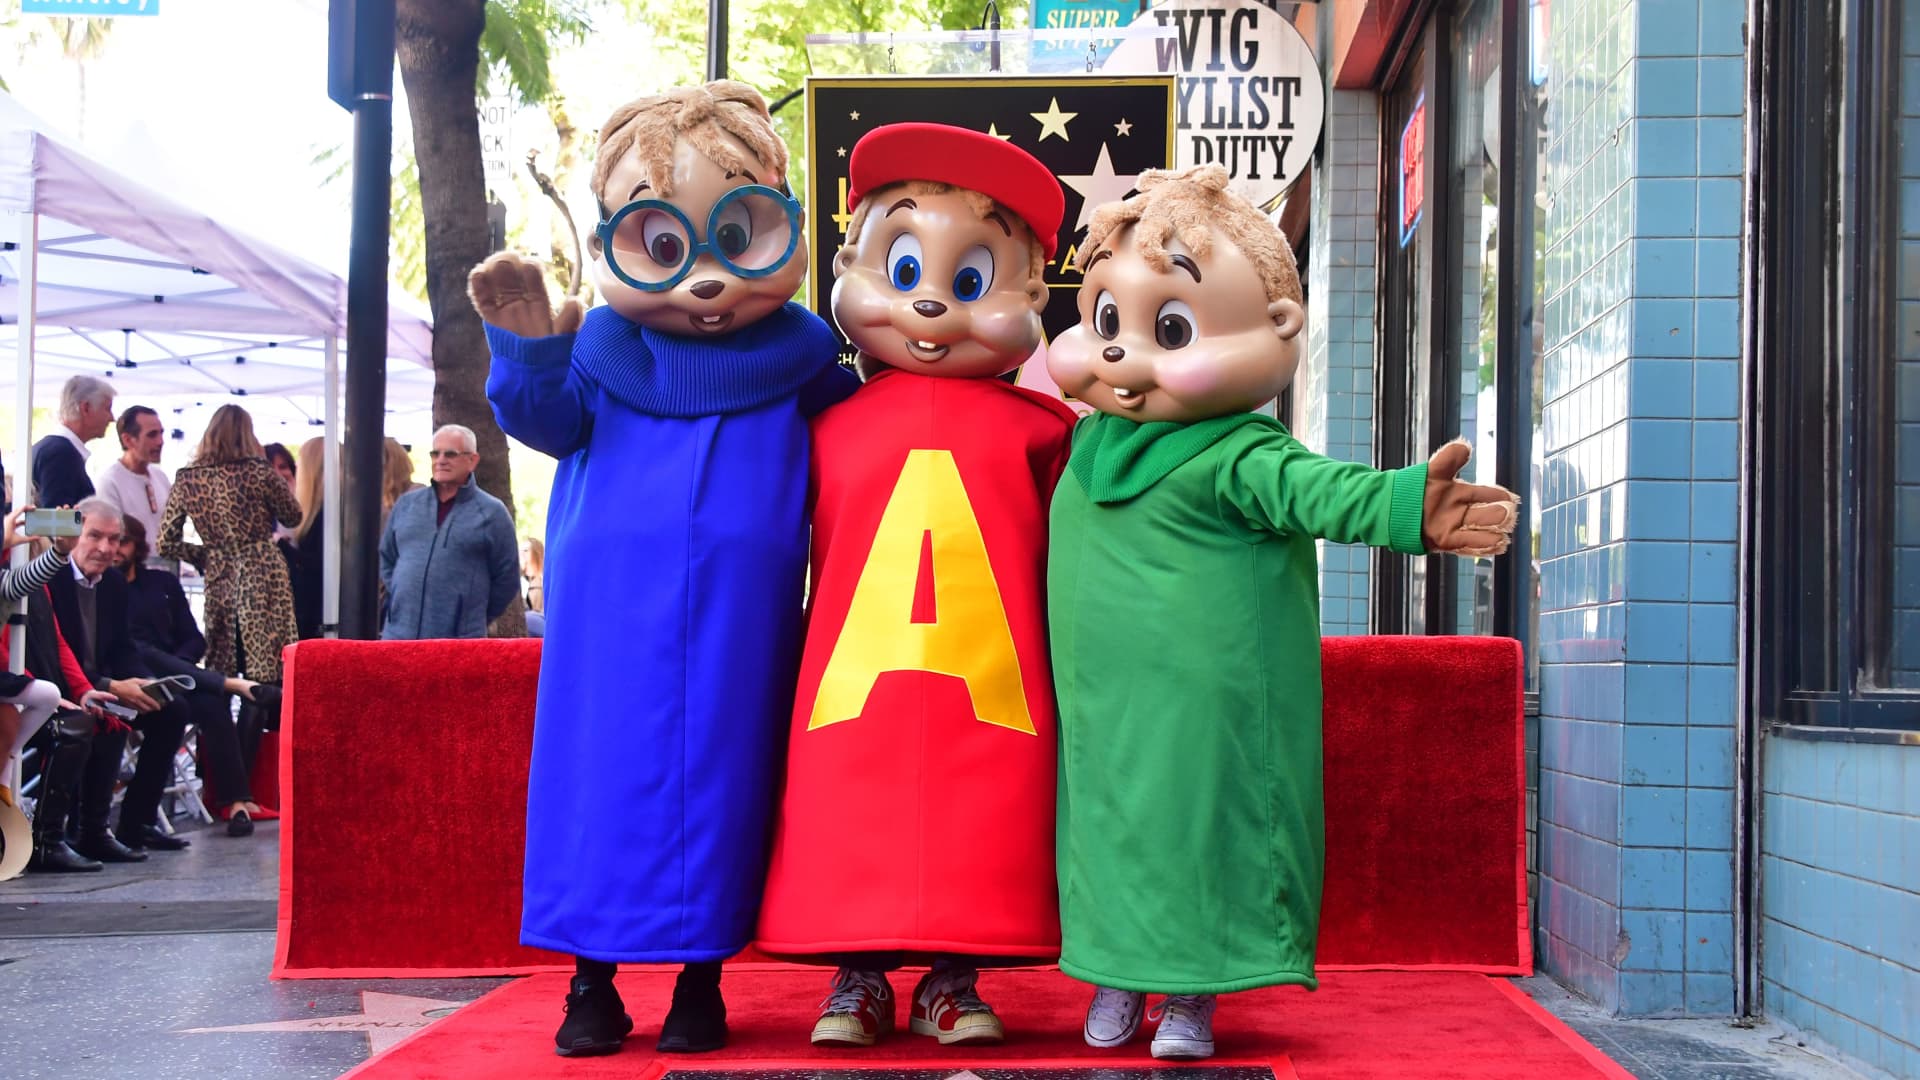 Alvin and the Chipmunks owner seeks sale for $300 million: sources